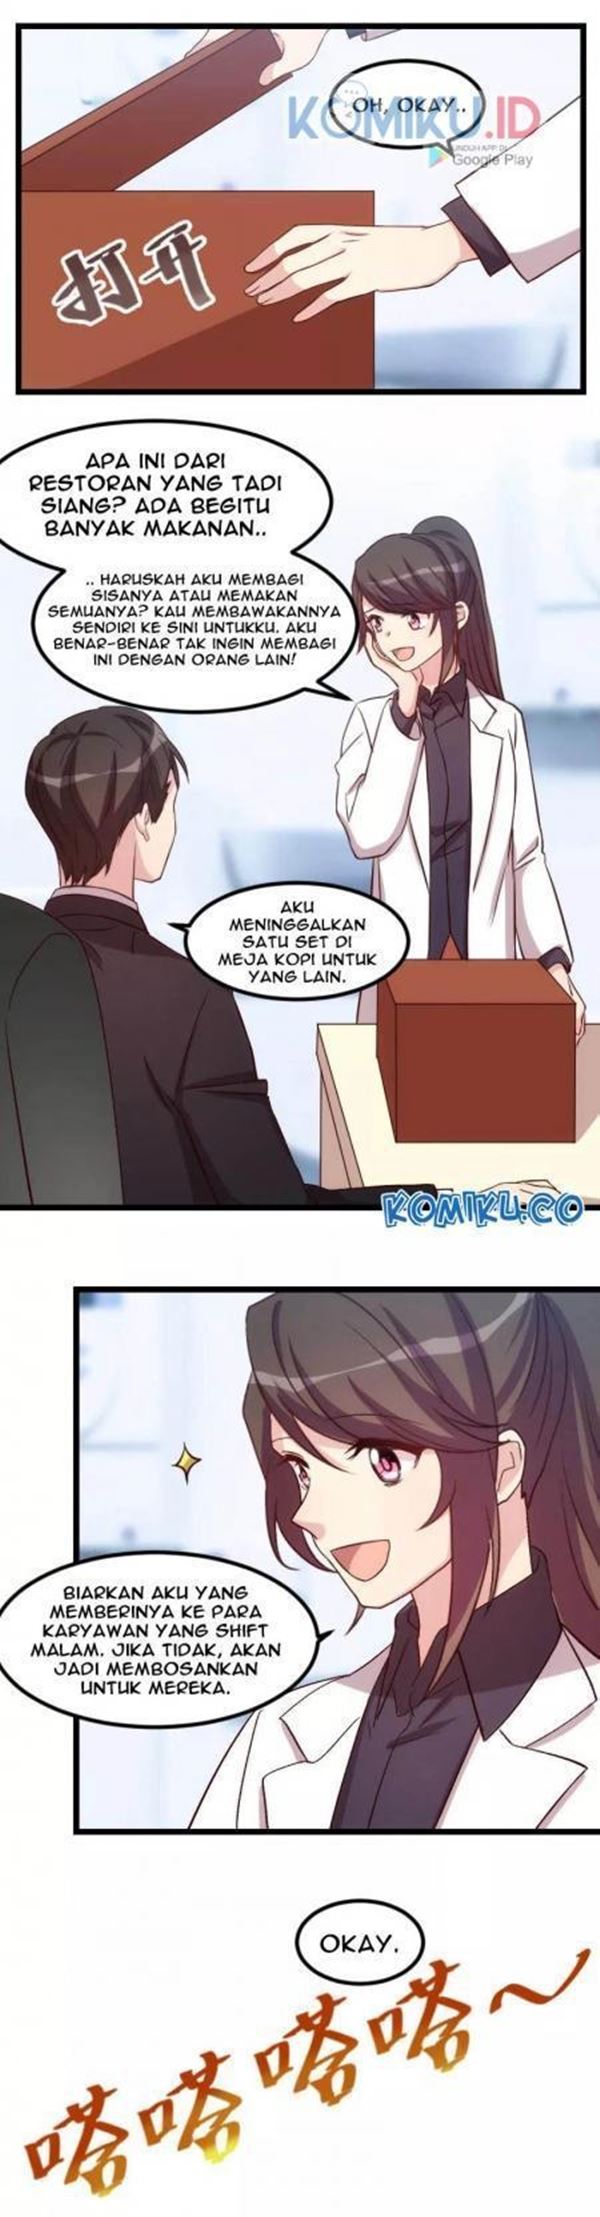 CEO’s Sudden Proposal Chapter 97